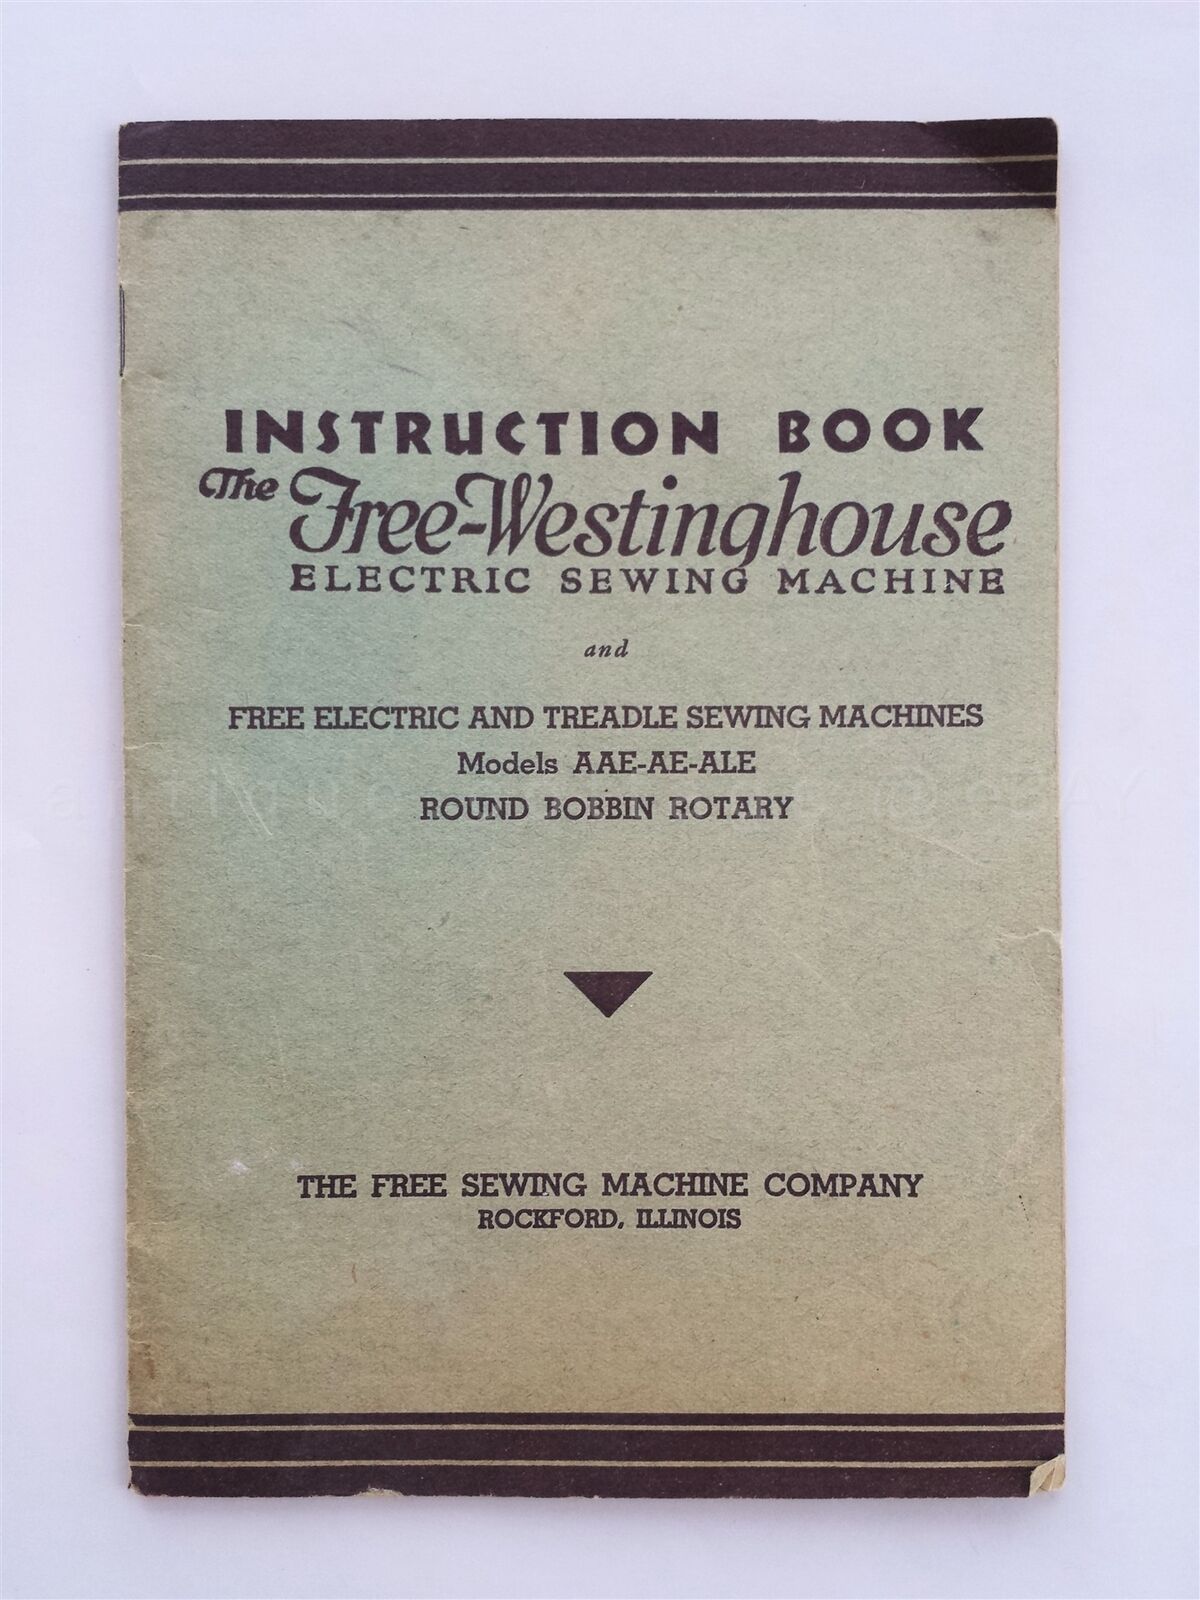 1934 vintage WESTINGHOUSE ELECTRIC SEWING MACHINE INSTRUCTION BOOK rockford il